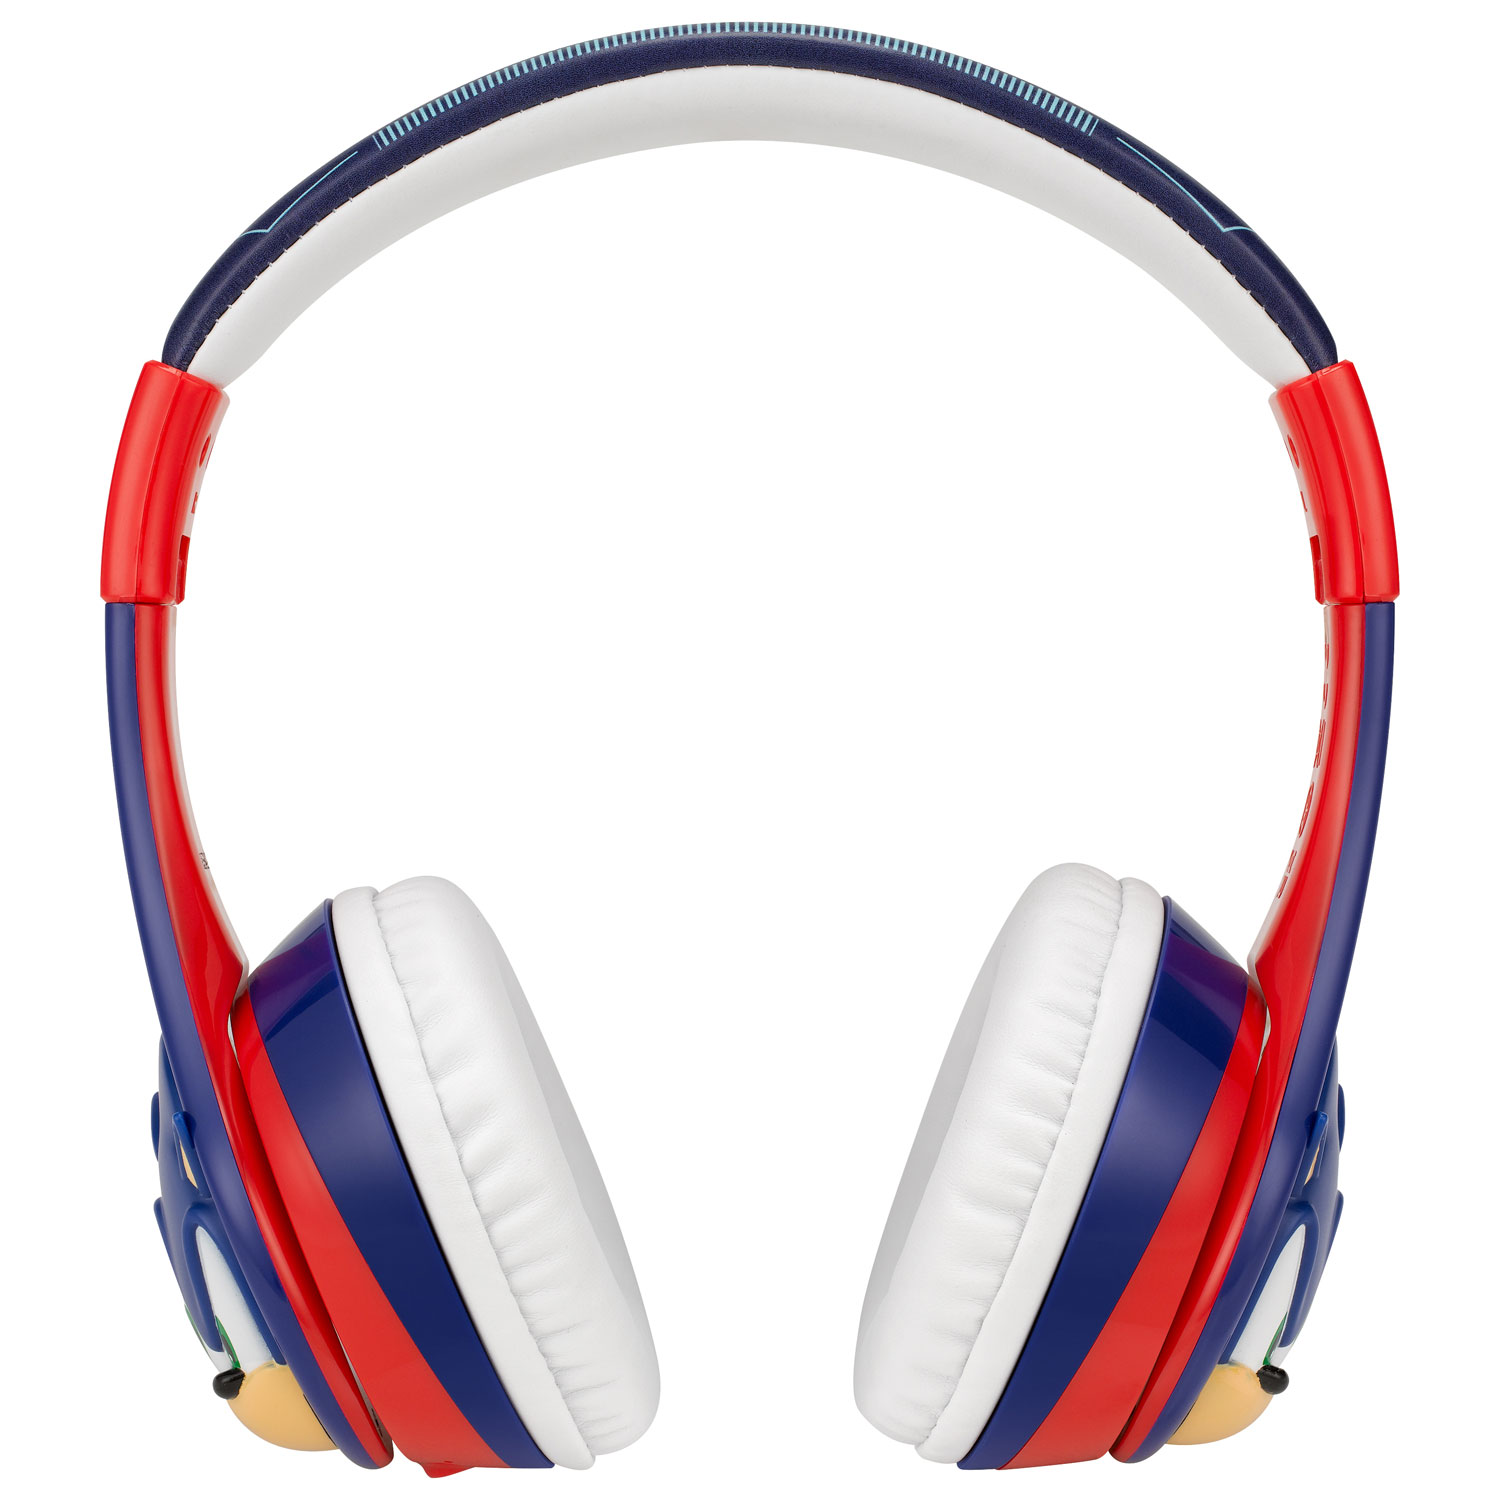 KIDdesigns Sonic Over-Ear Bluetooth Kids Headphones with Microphone - Blue/Red/White